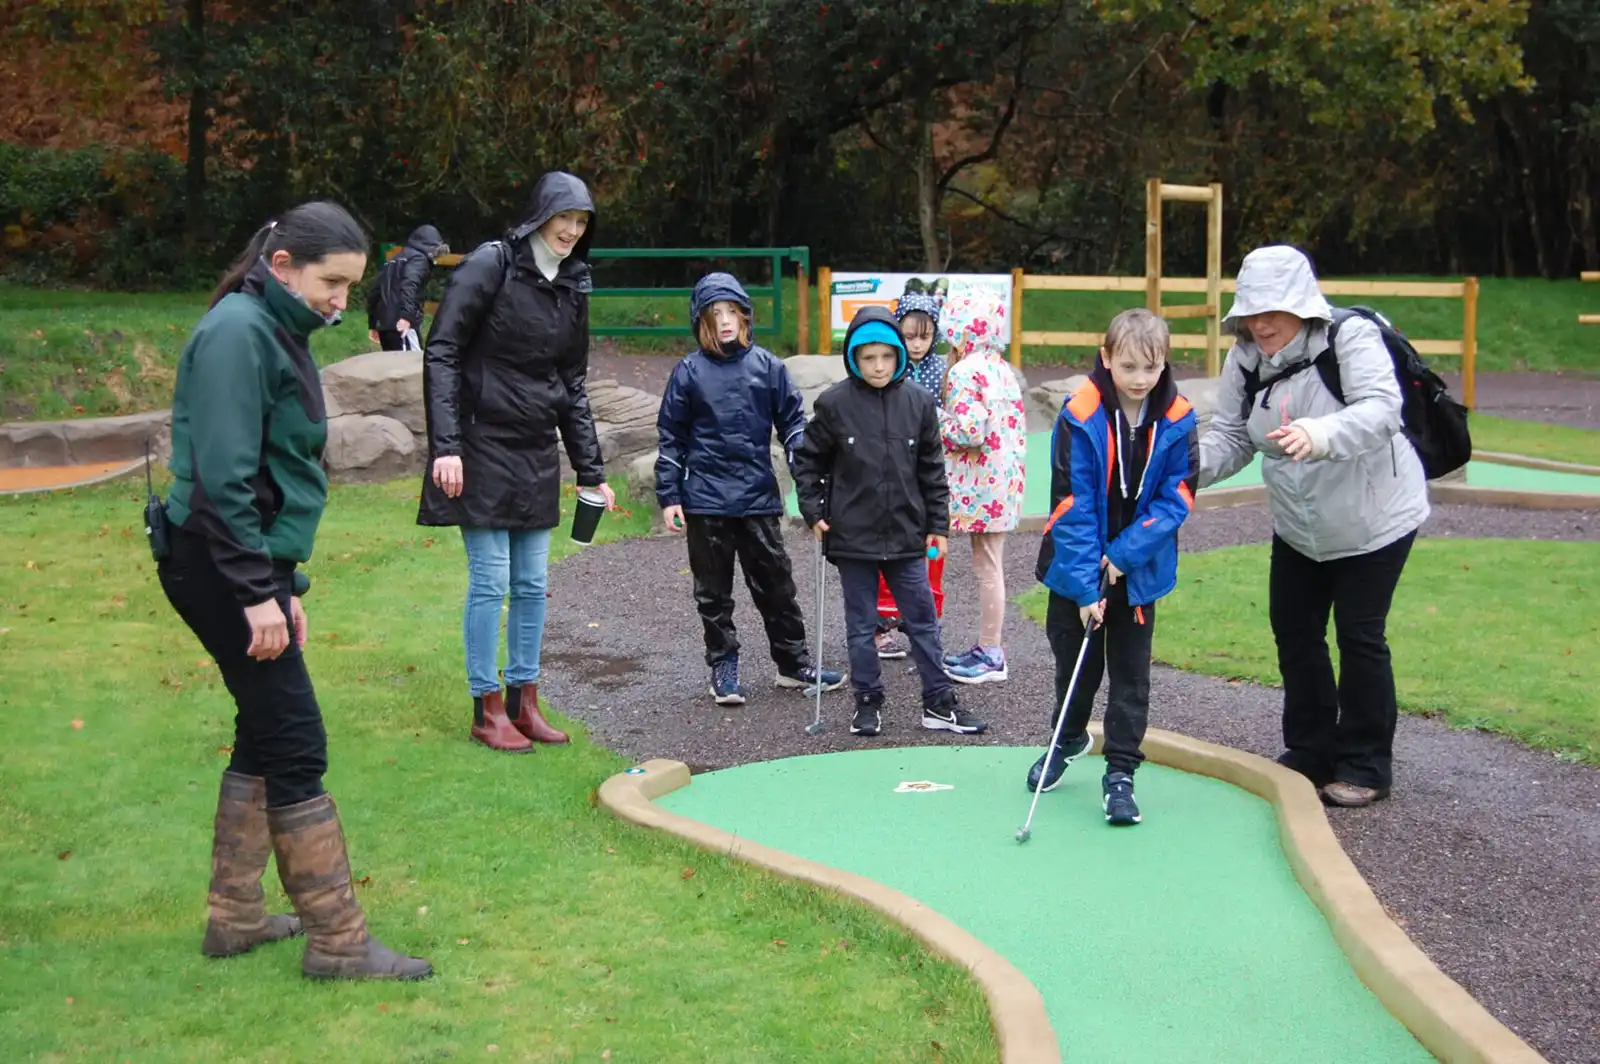 Adventure Golf is also on offer at Moors Valley. Picture: Dorset Council